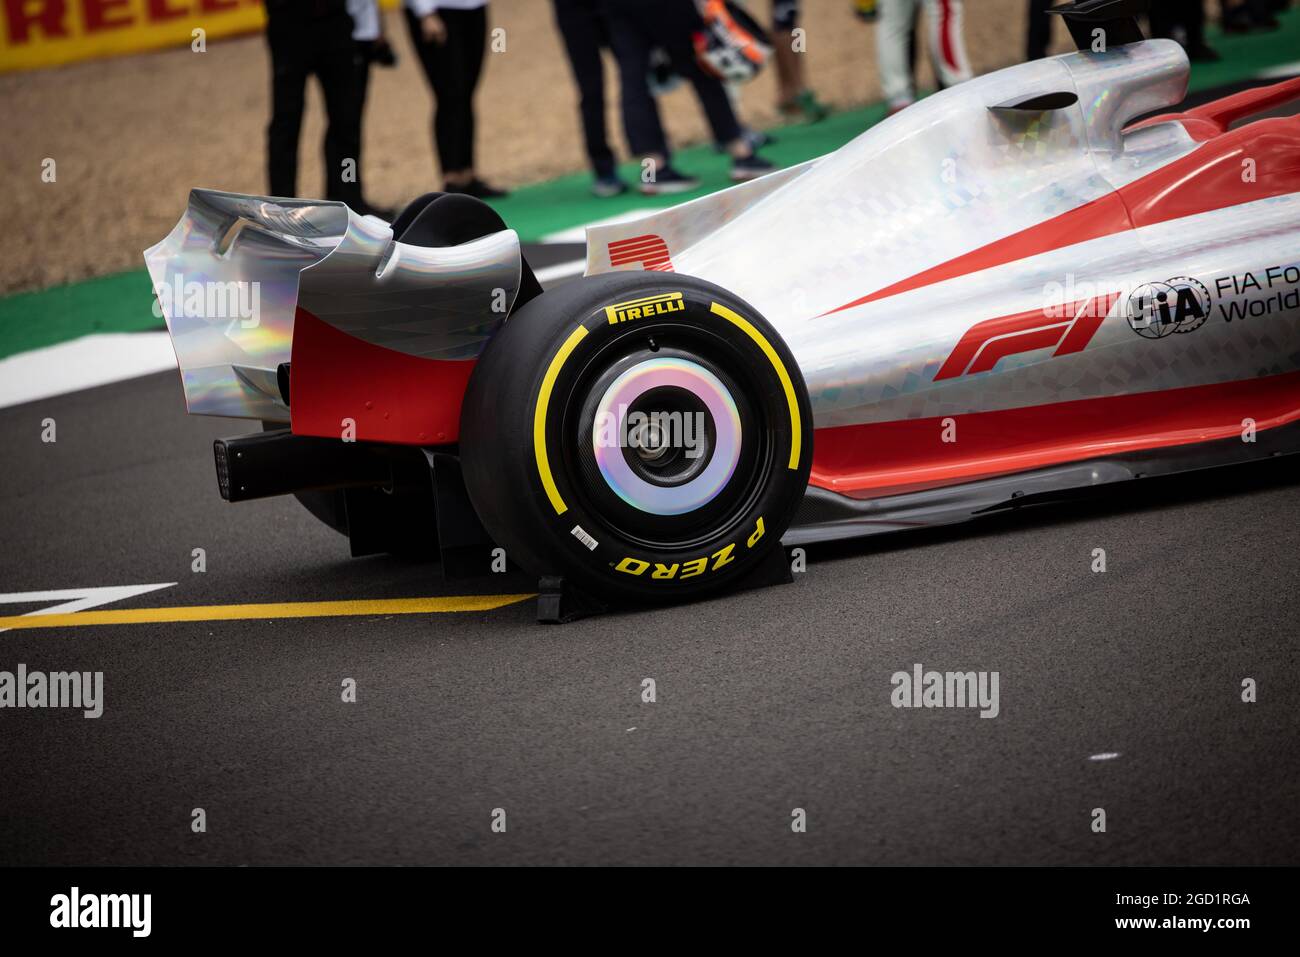 2022 Car Launch - rear wing detail. British Grand Prix, Thursday 15th July 2021. Silverstone, England. Stock Photo